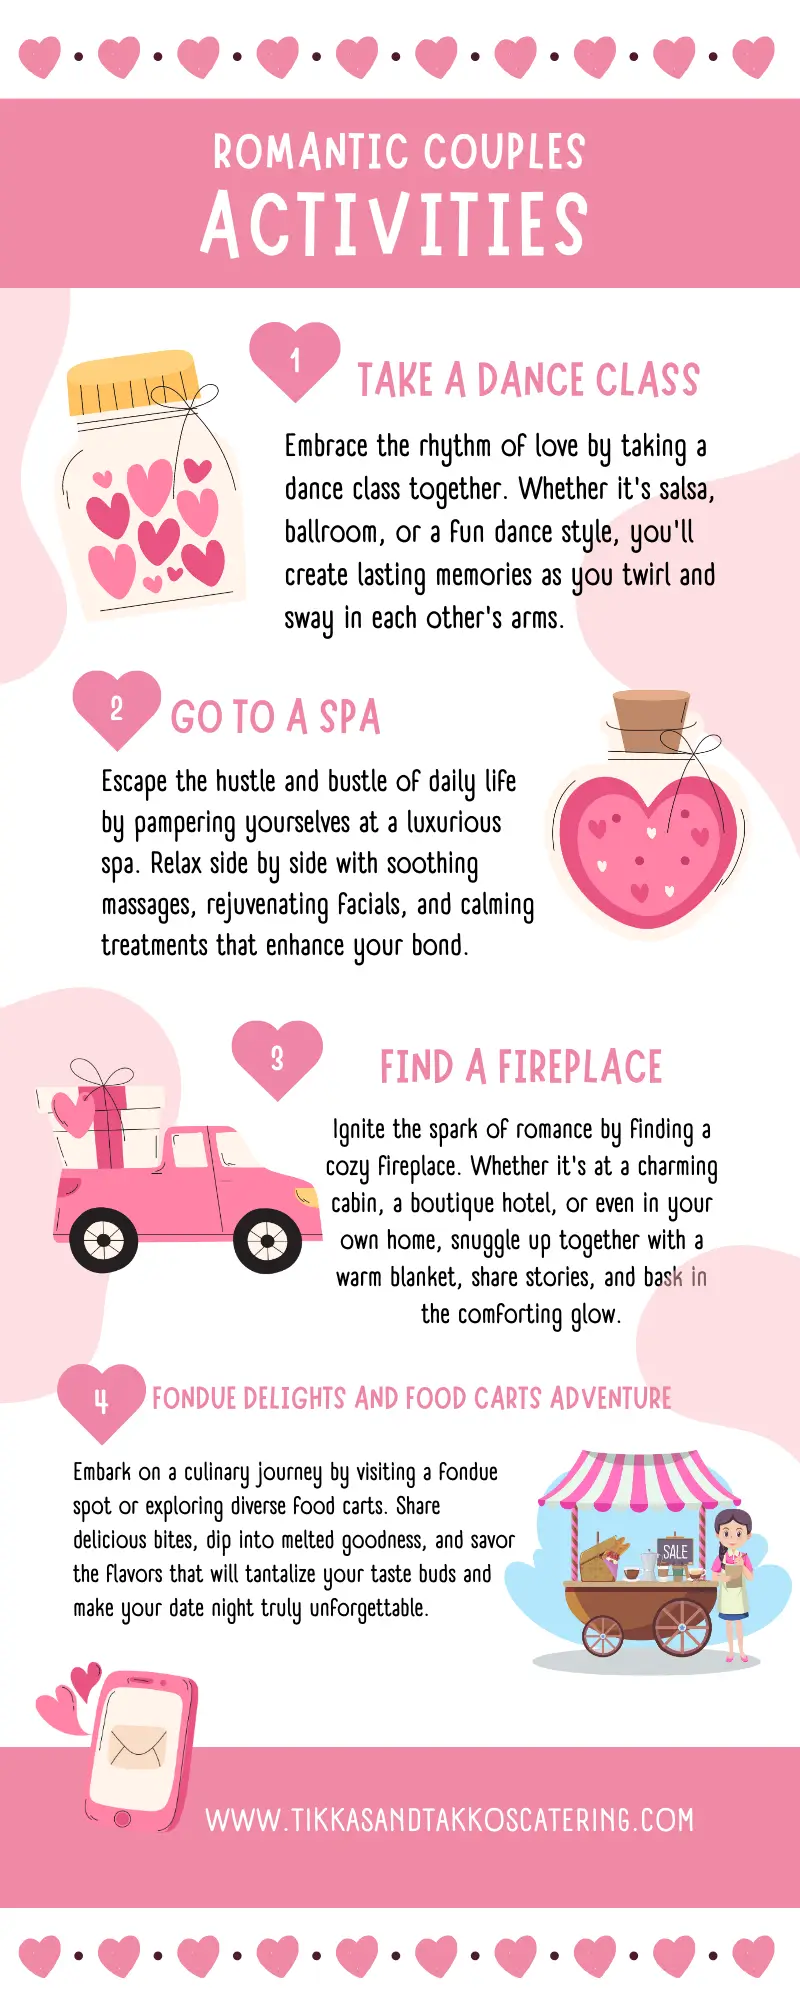 may be image show valentines day activities infographic 